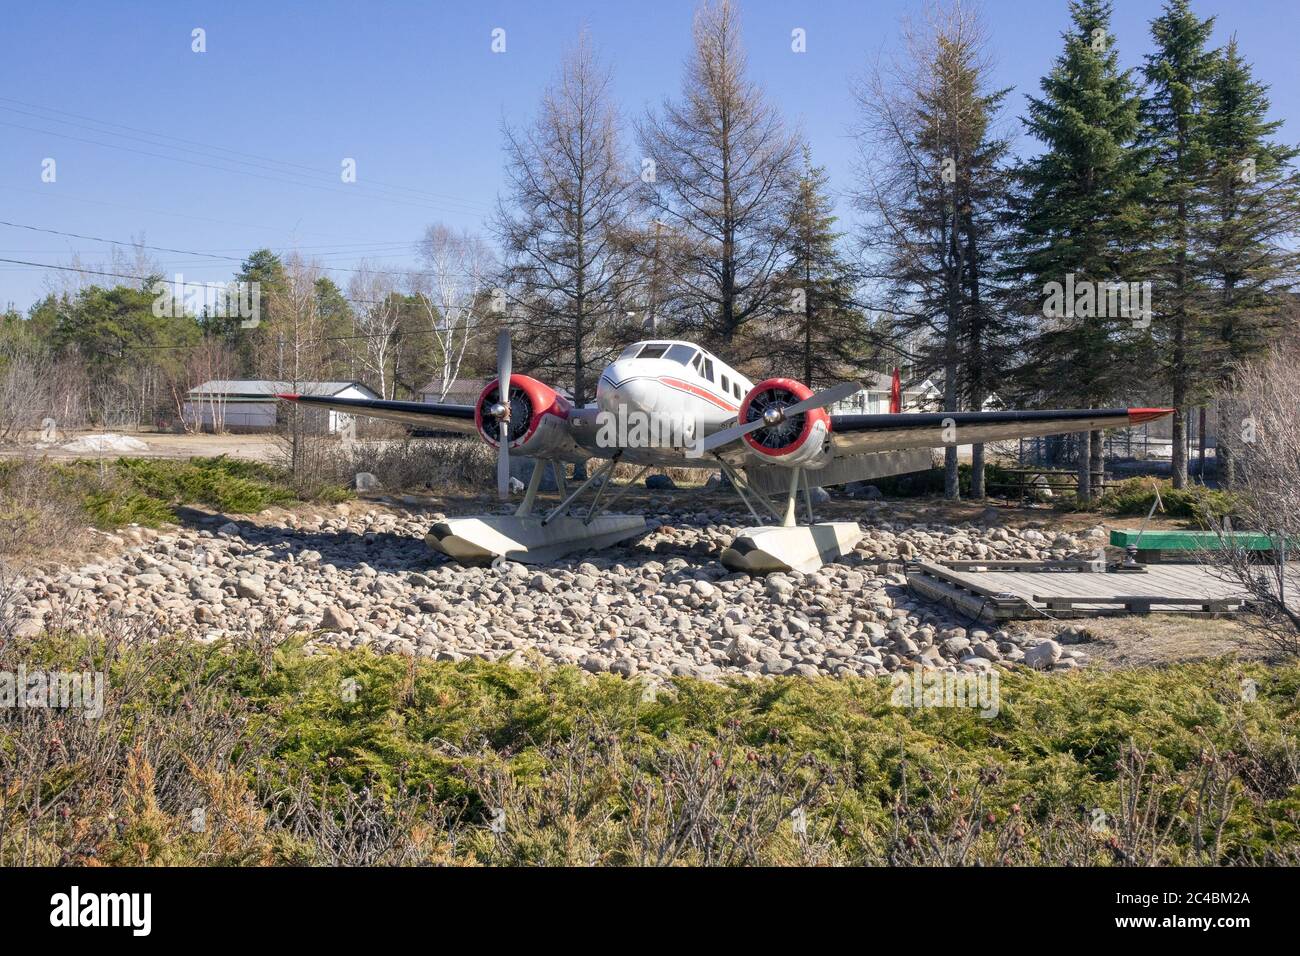 A Beechcraft Expeditor Float Plane Display In The Town Of Ignace On The Trans Canadian Highway Northern Ontario Canada Stock Photo